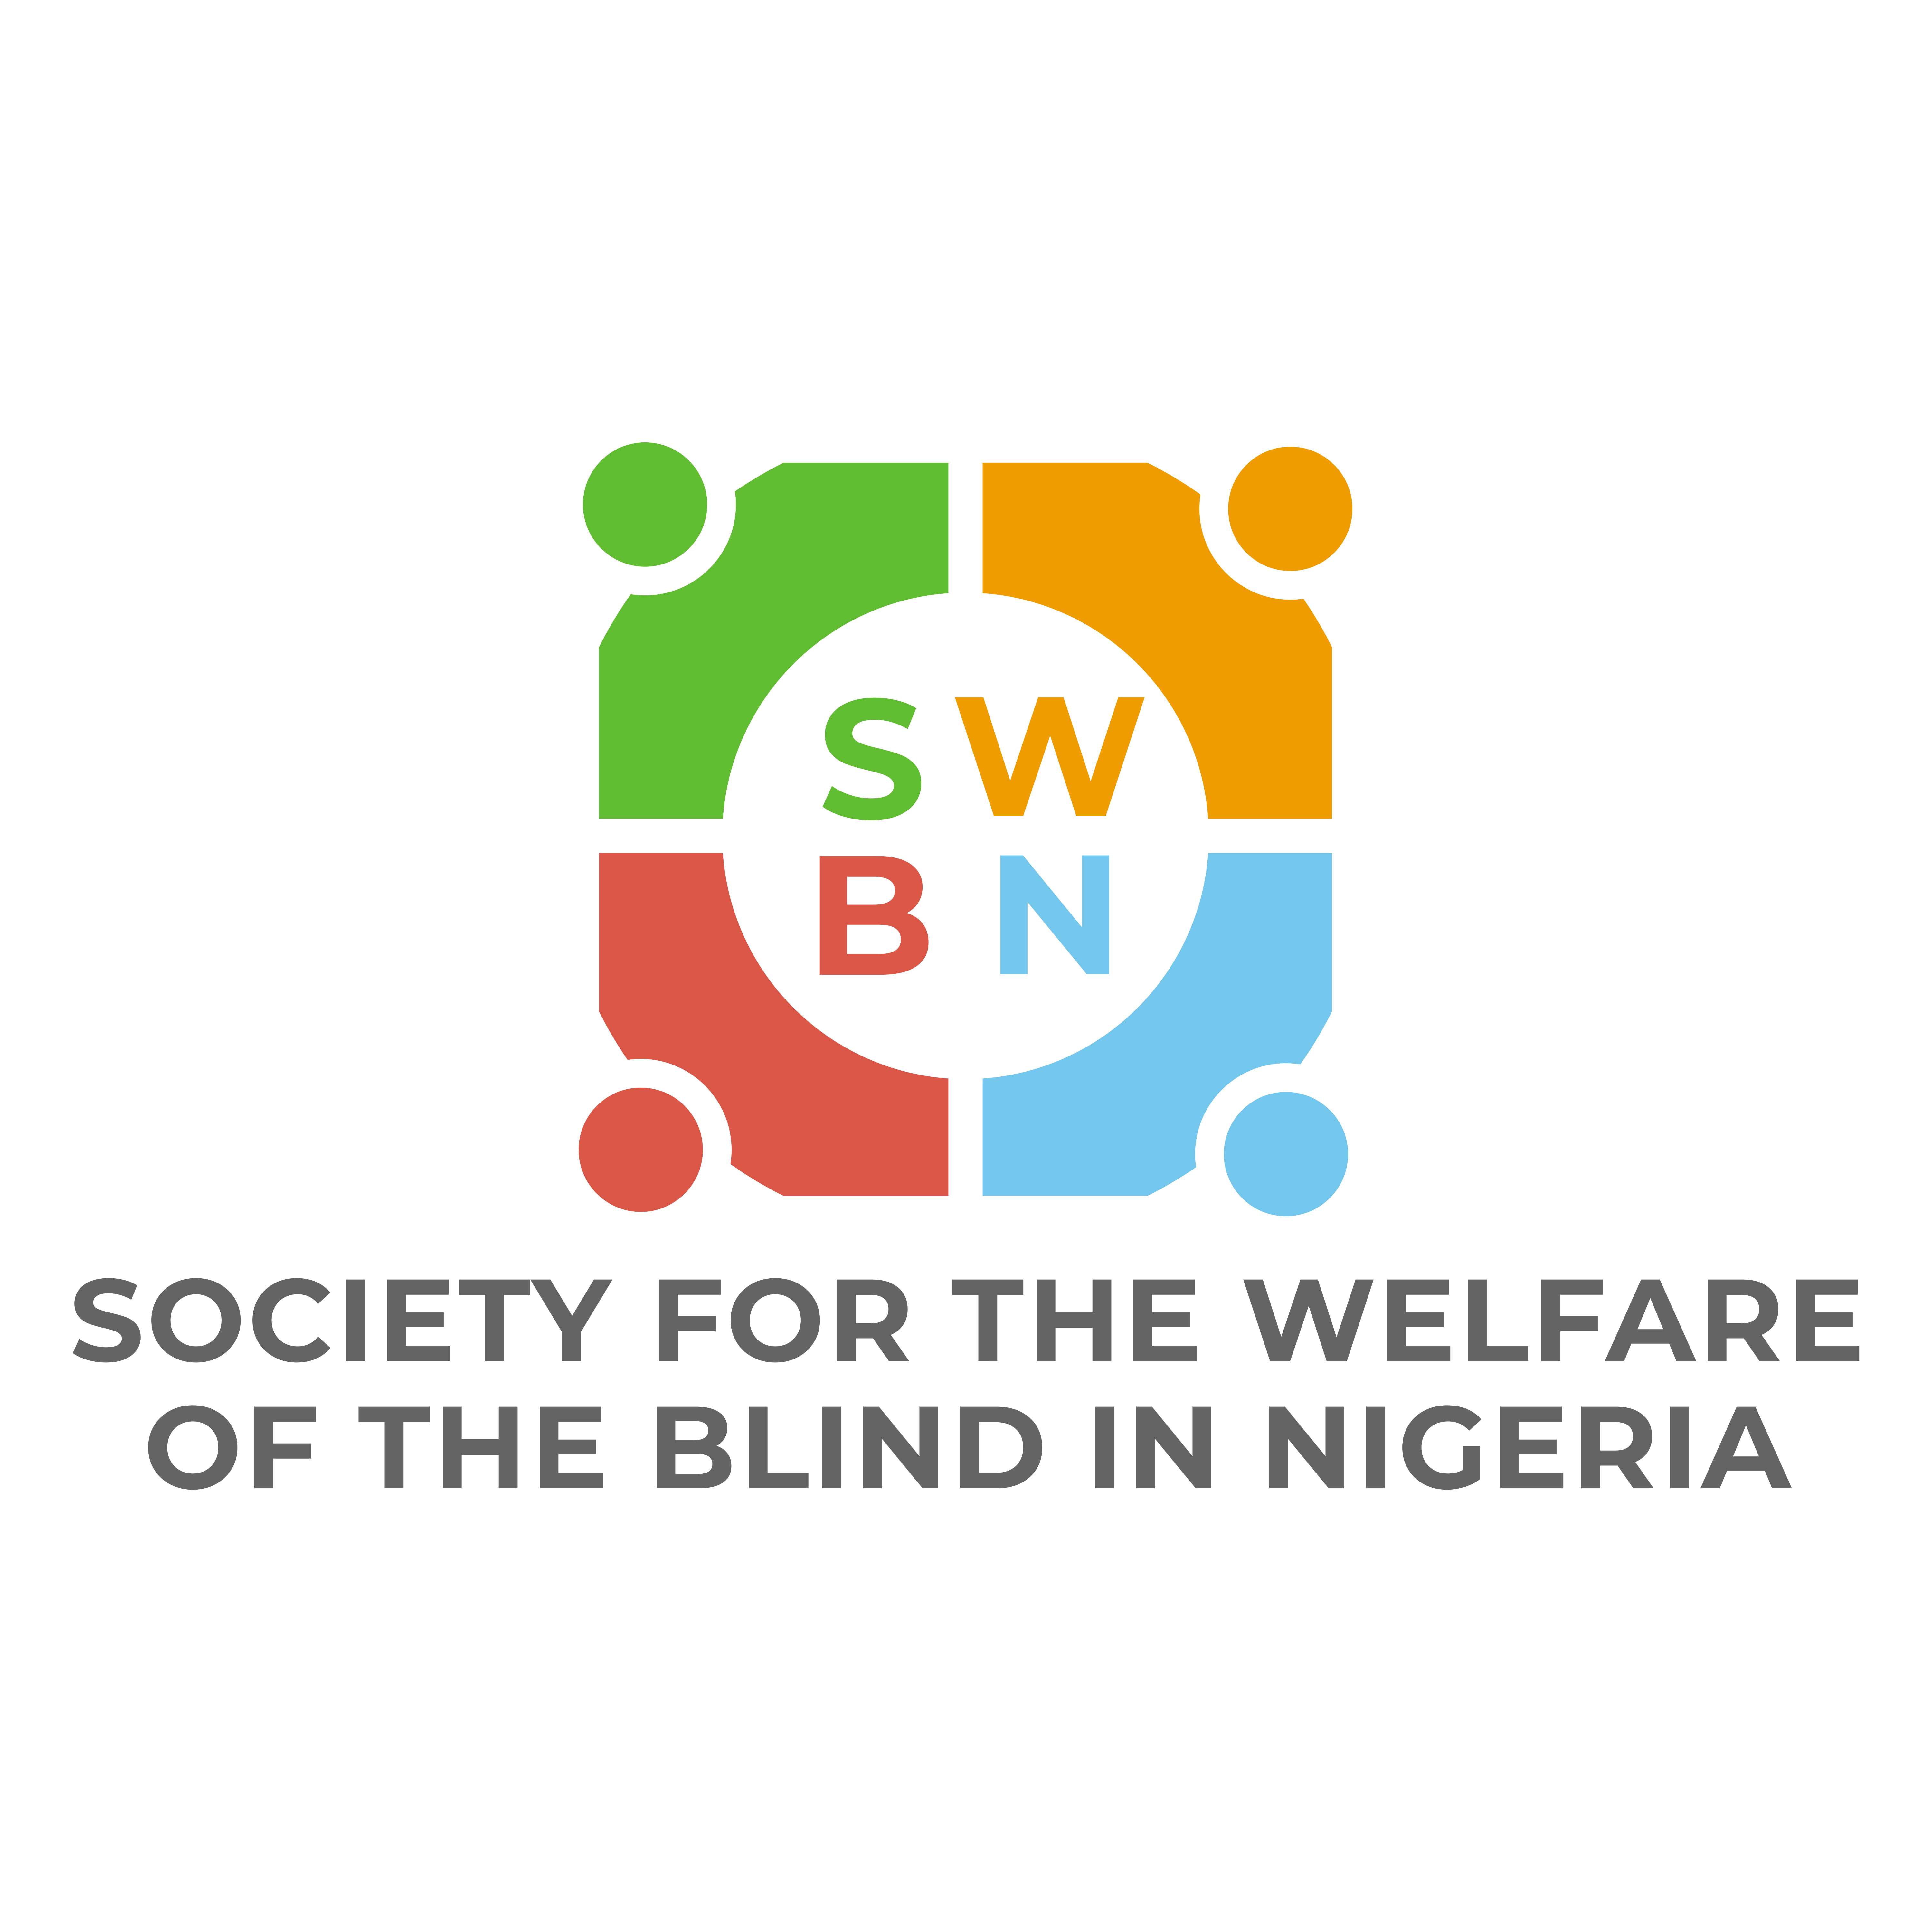 Logo' of the Society for Welfare of the Blind in Nigeria